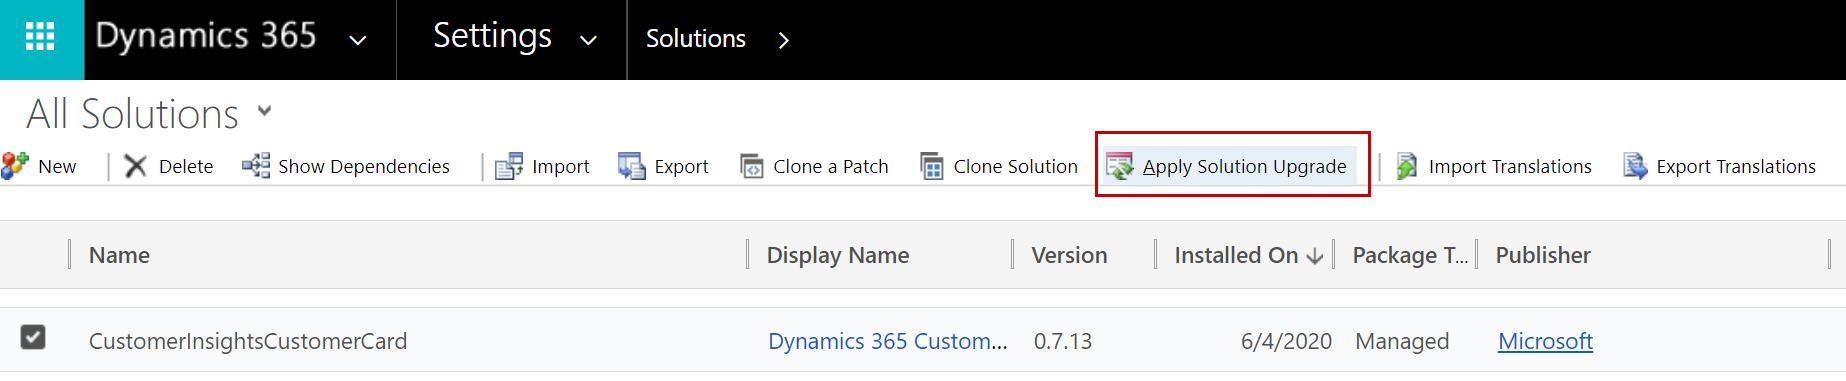 Upgrade the solution in the Customization area of Dynamics 365 apps.